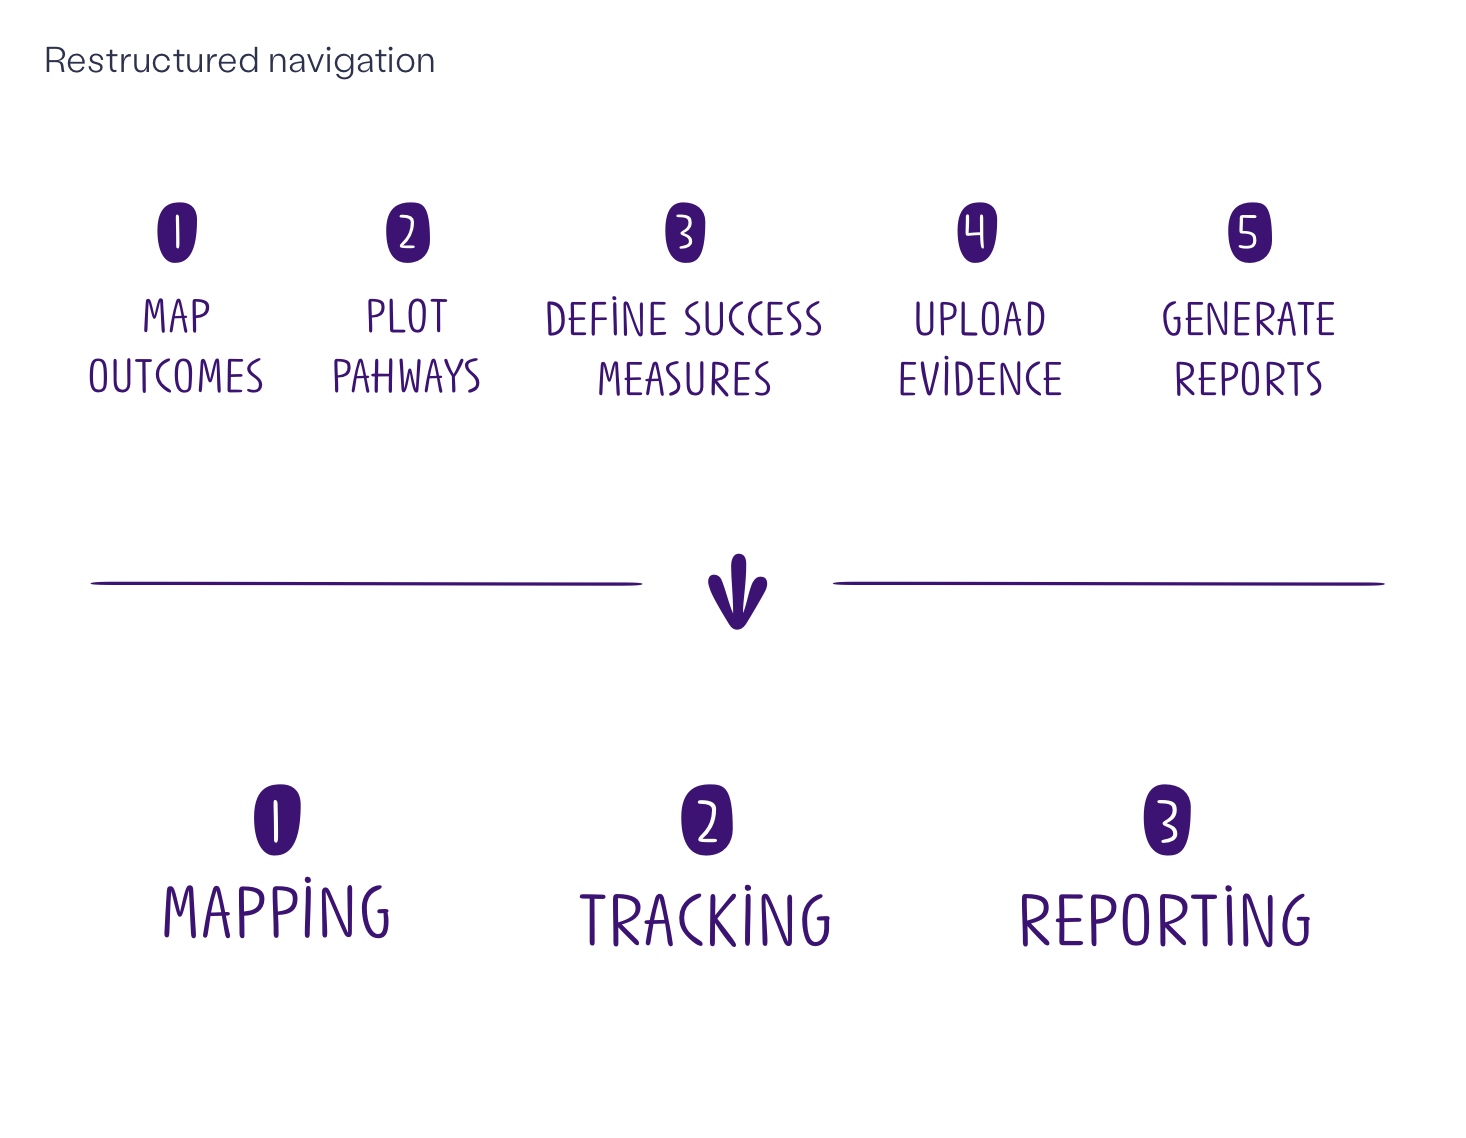 An infographic in purple displaying the restructured navigation.